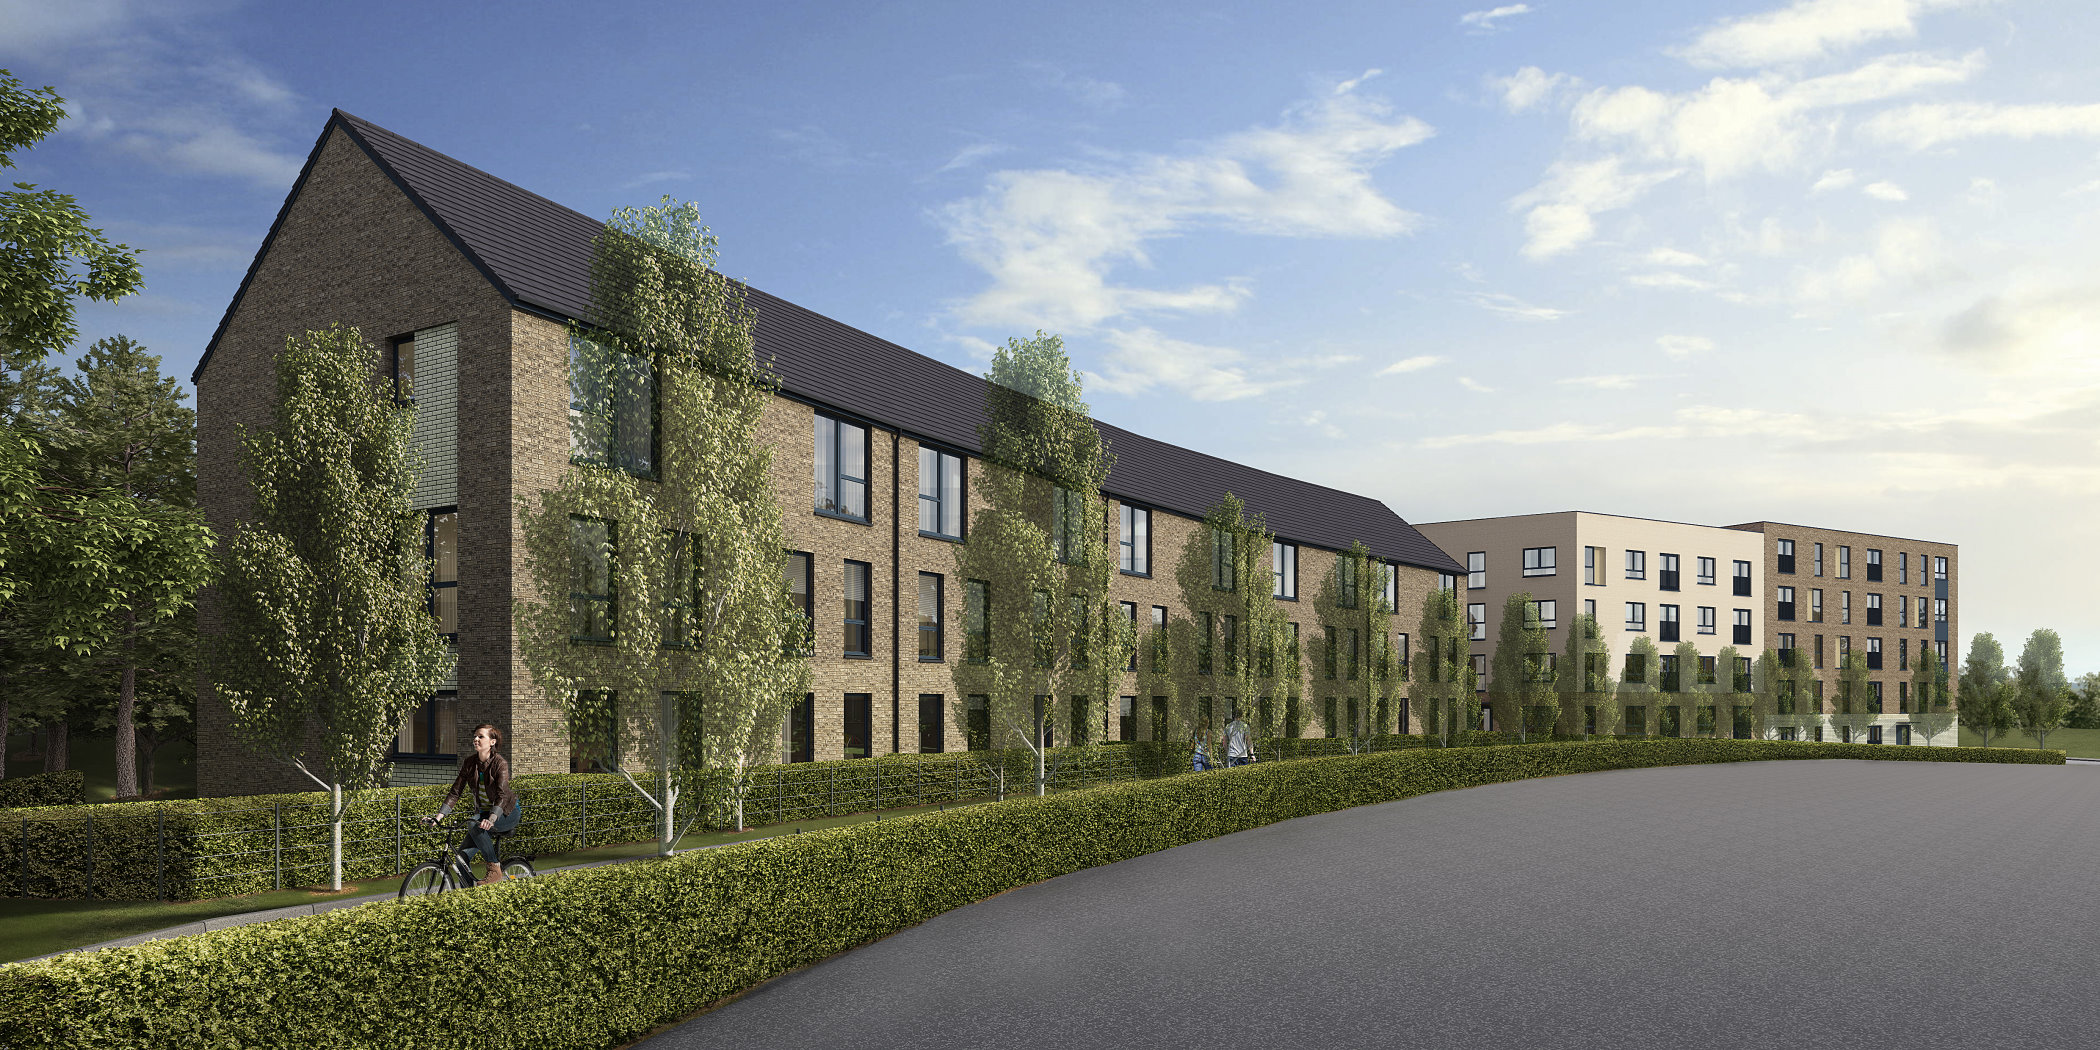 Barratt Homes to transform disused land in Leith